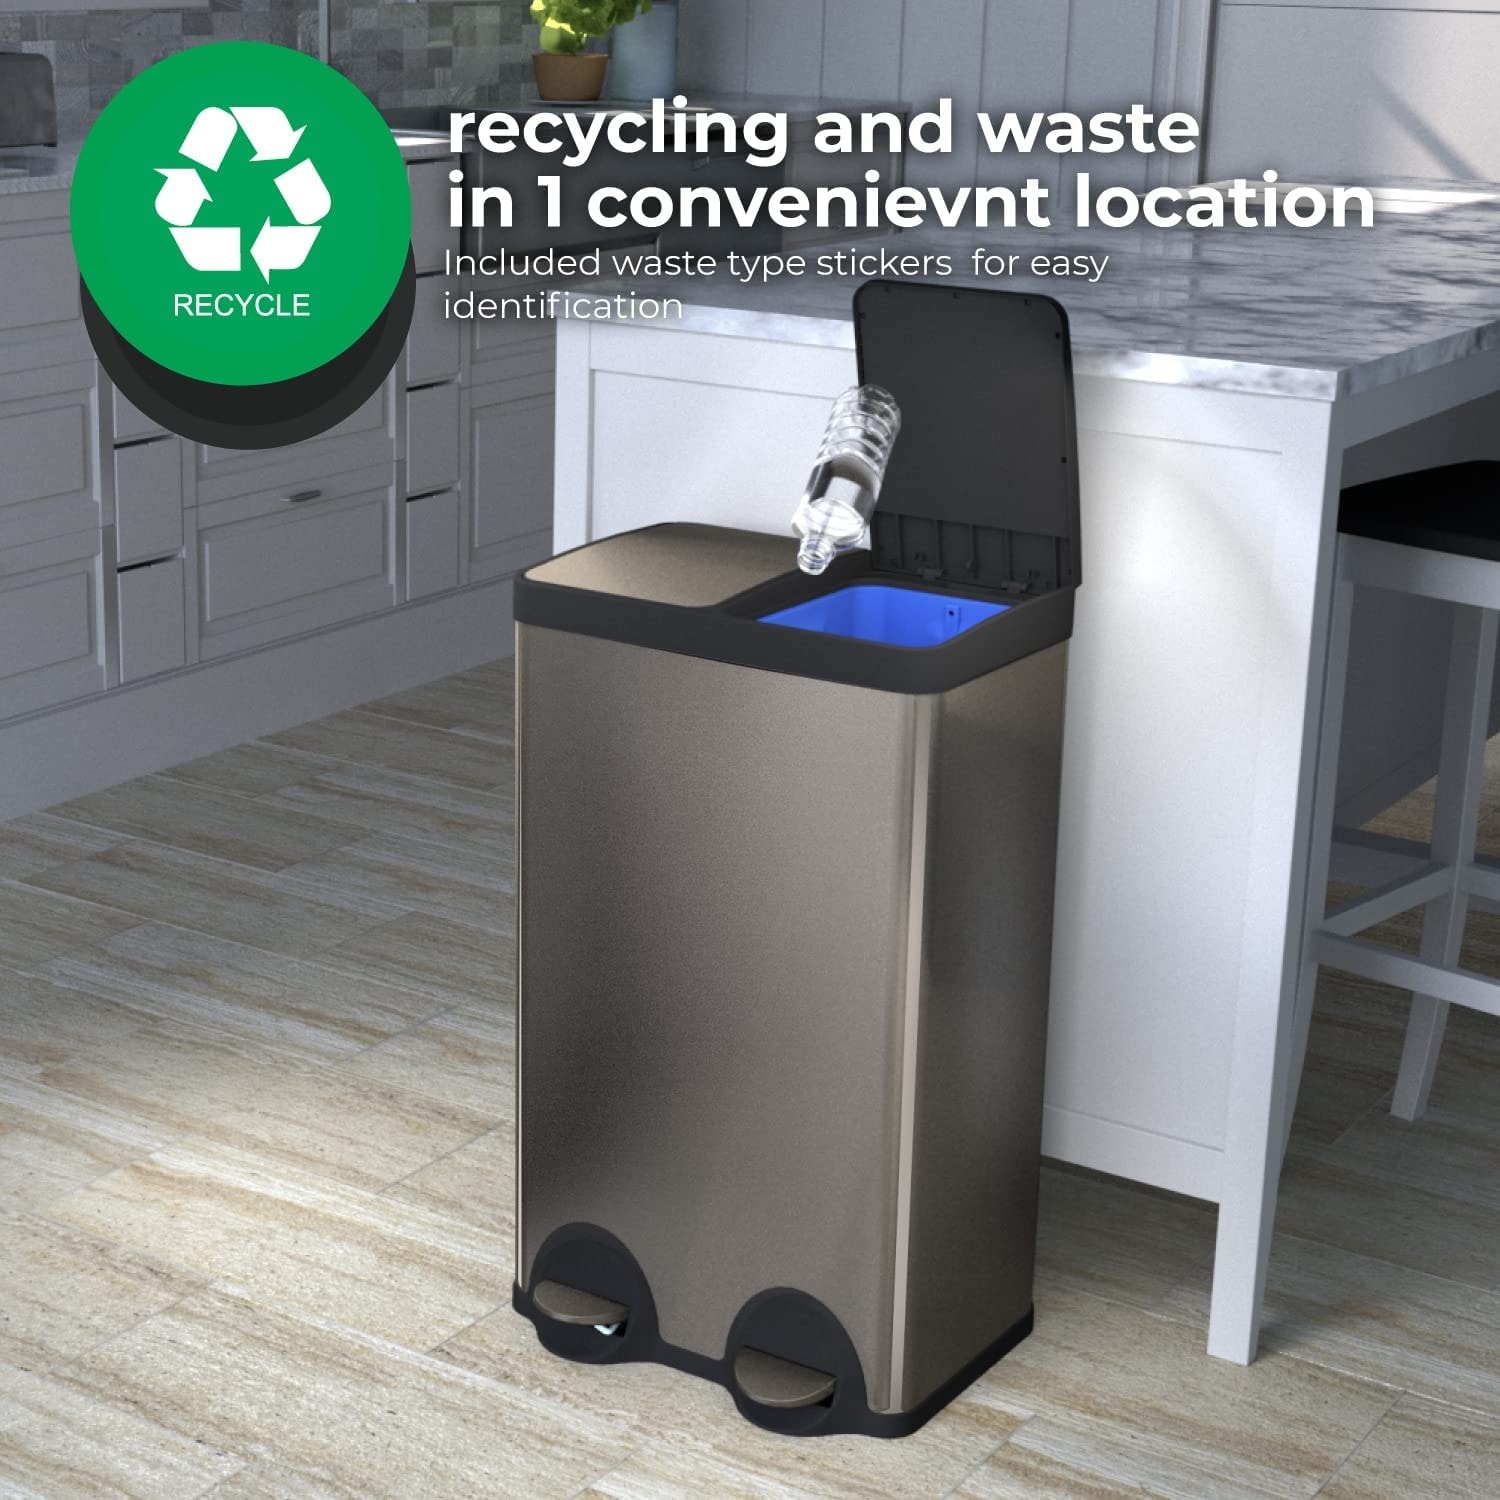 https://ak1.ostkcdn.com/images/products/is/images/direct/4bc4b72f06ba97875418e6cfae00dc82243d26a6/Home-Zone-Living-13-Gallon-Kitchen-Trash-Can%2C-Dual-Compartment-Recycle-Combo%2C-Slim-Body-Stainless-Steel-Design.jpg